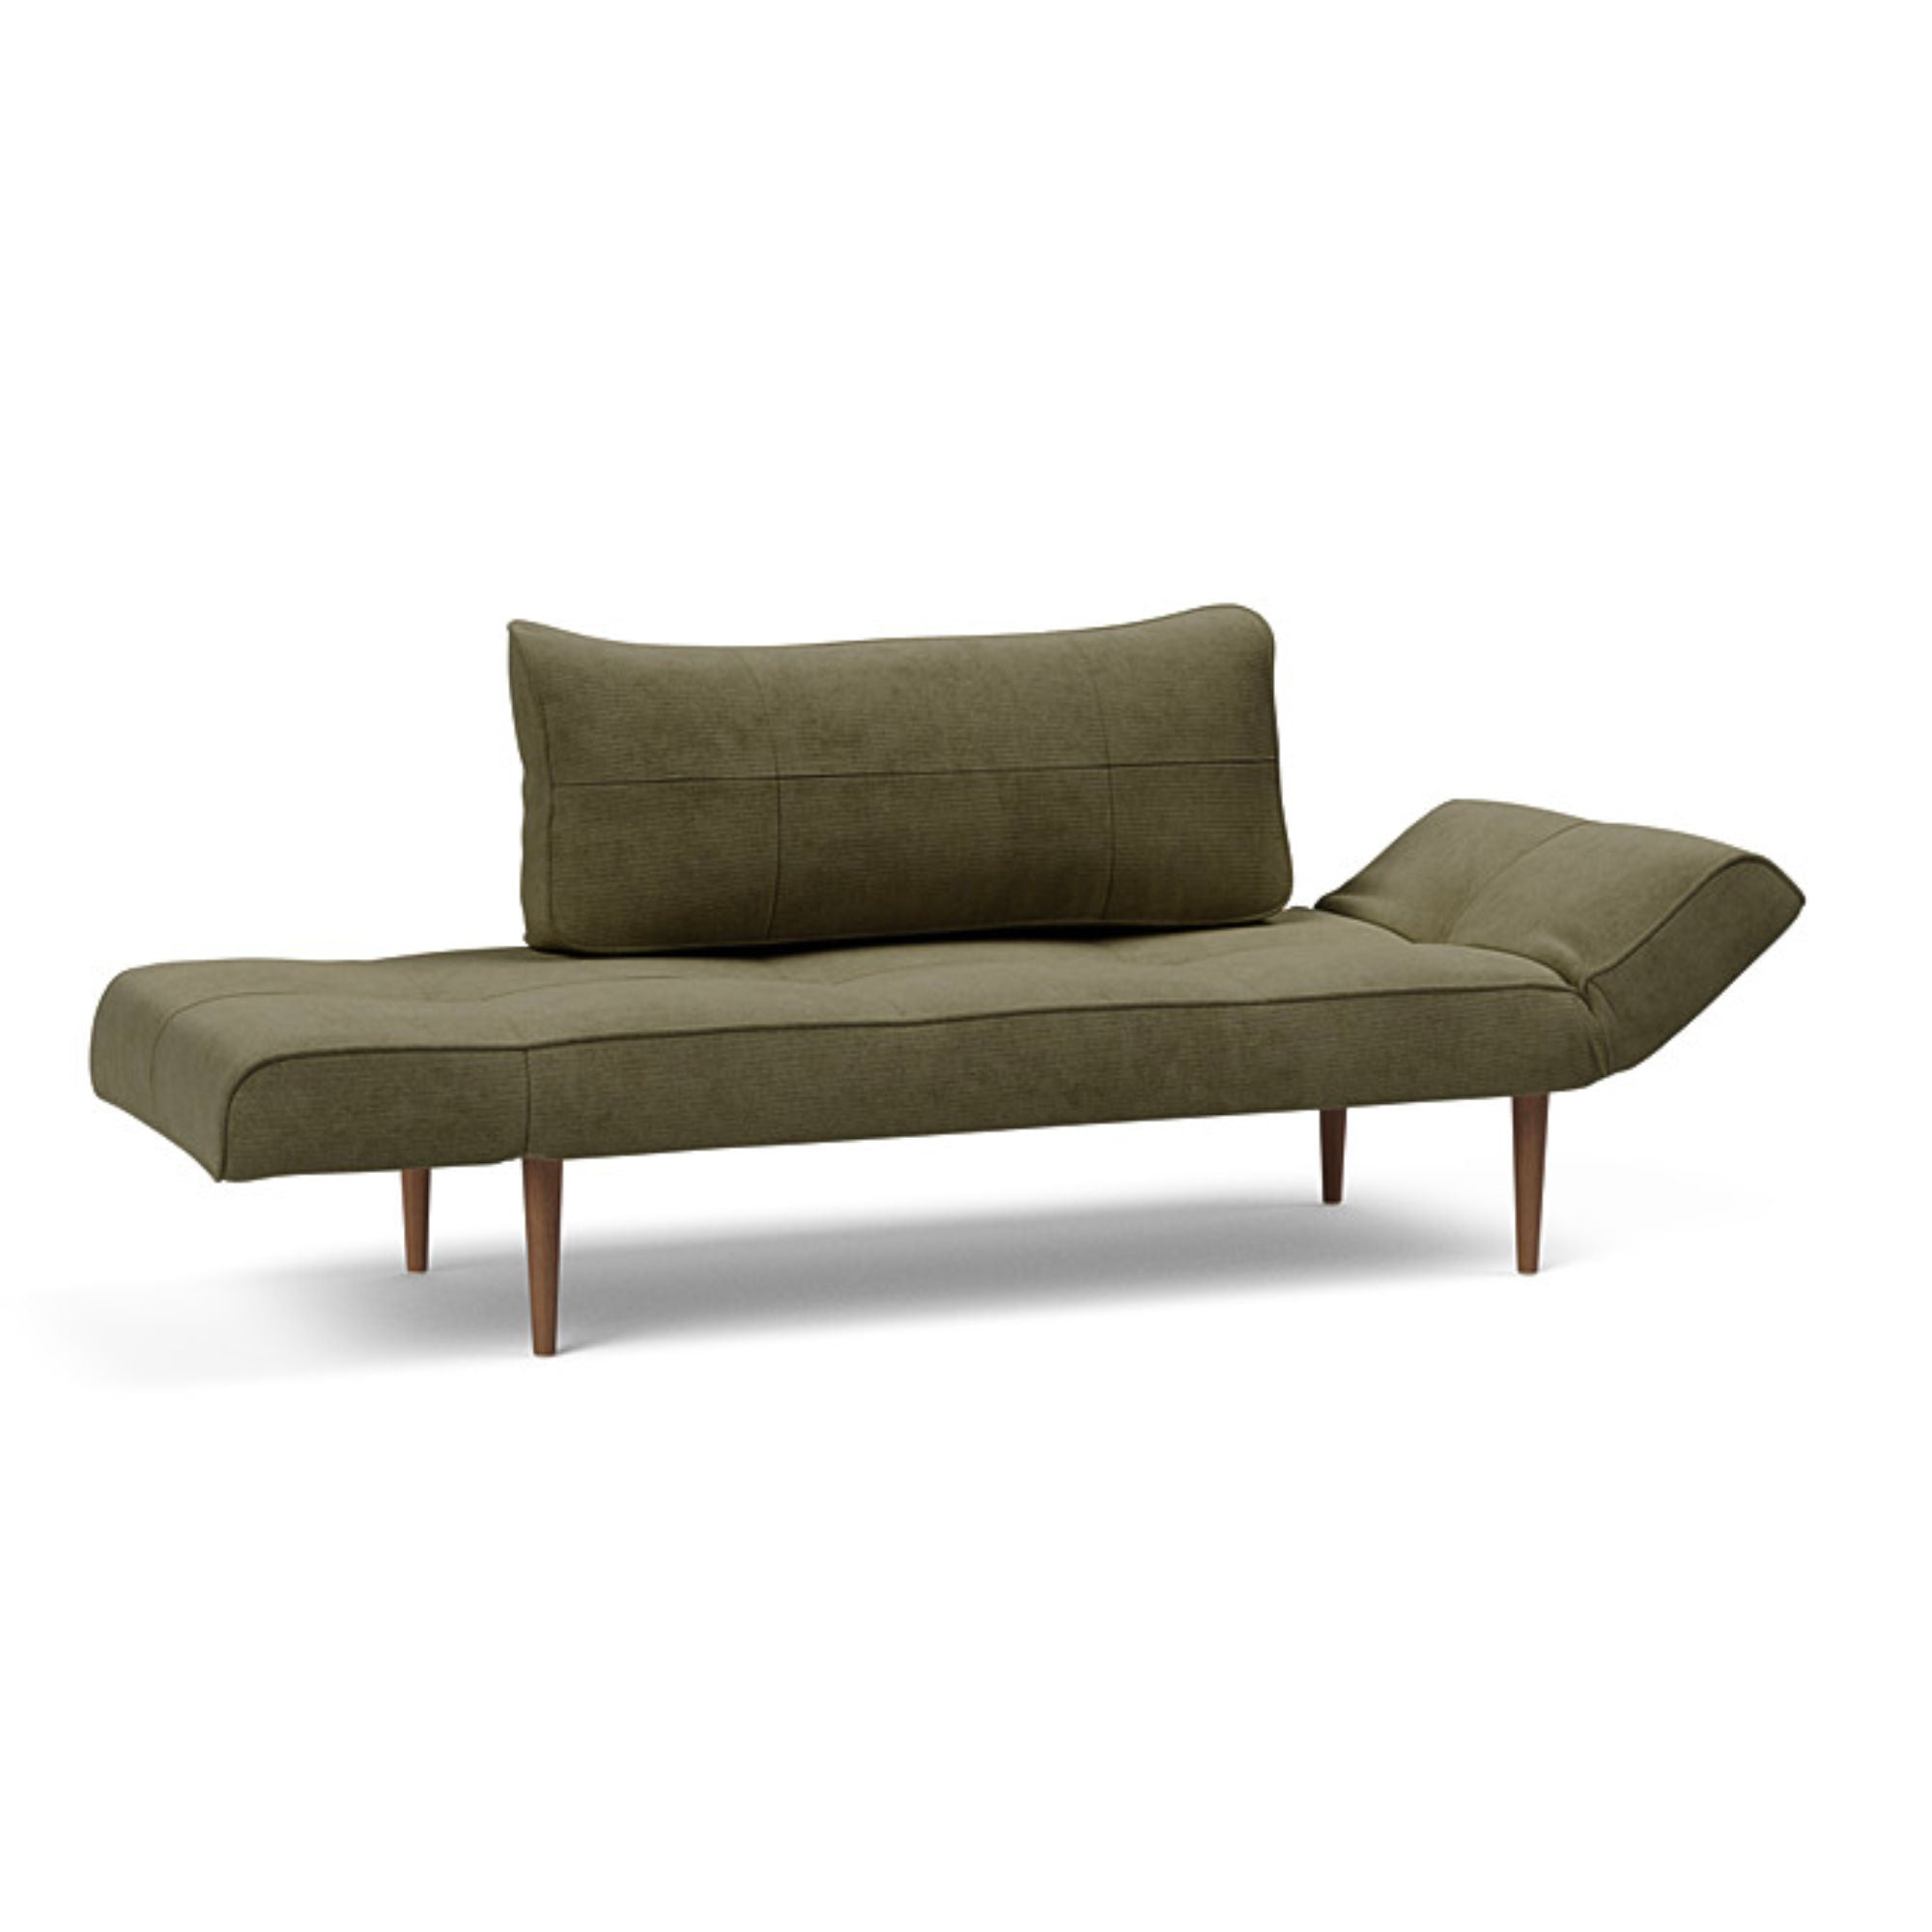 Innovation Living Zeal Daybed , 316 cordufine pine green